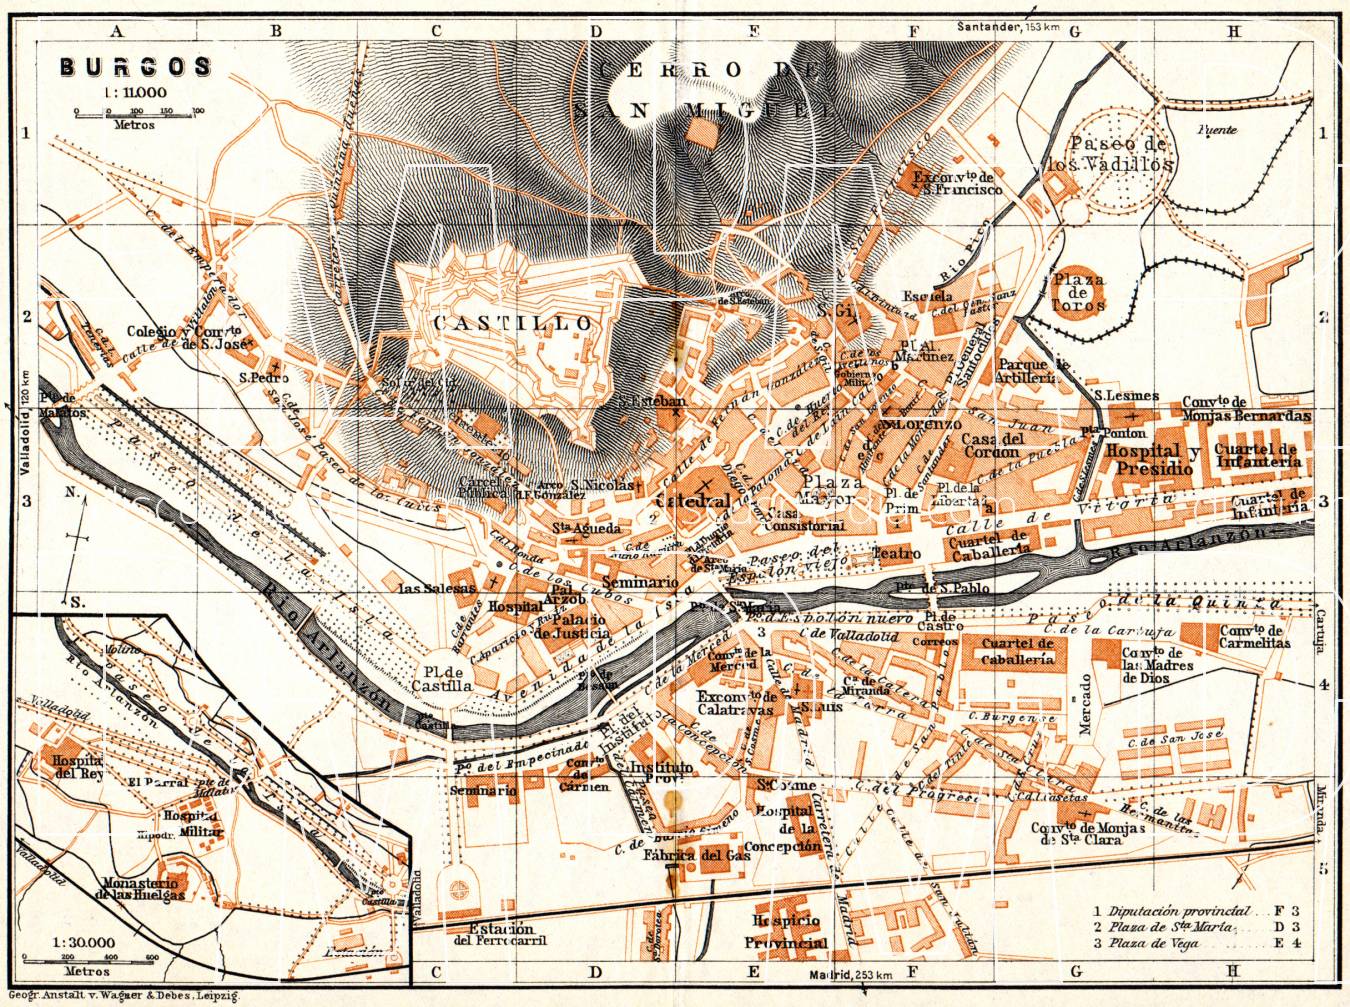 Old map of Burgos in 1929. Buy vintage map replica poster print or ...